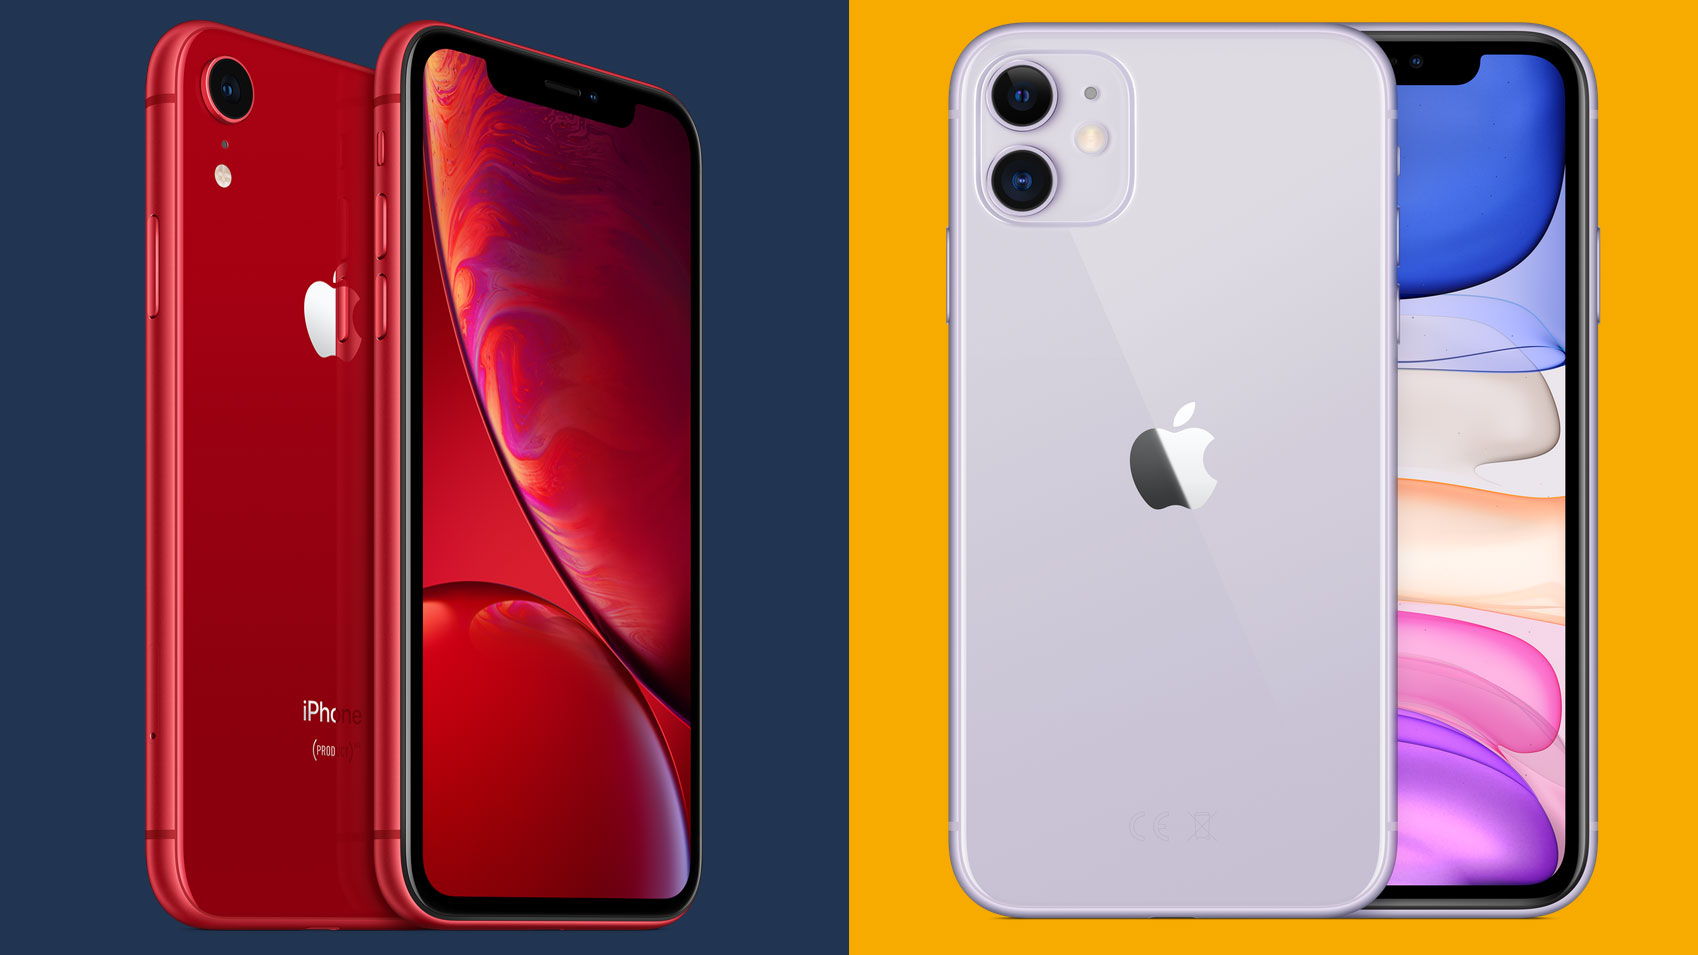 IPhone 11 Vs IPhone XR: A Comprehensive Comparison To Help You Choose